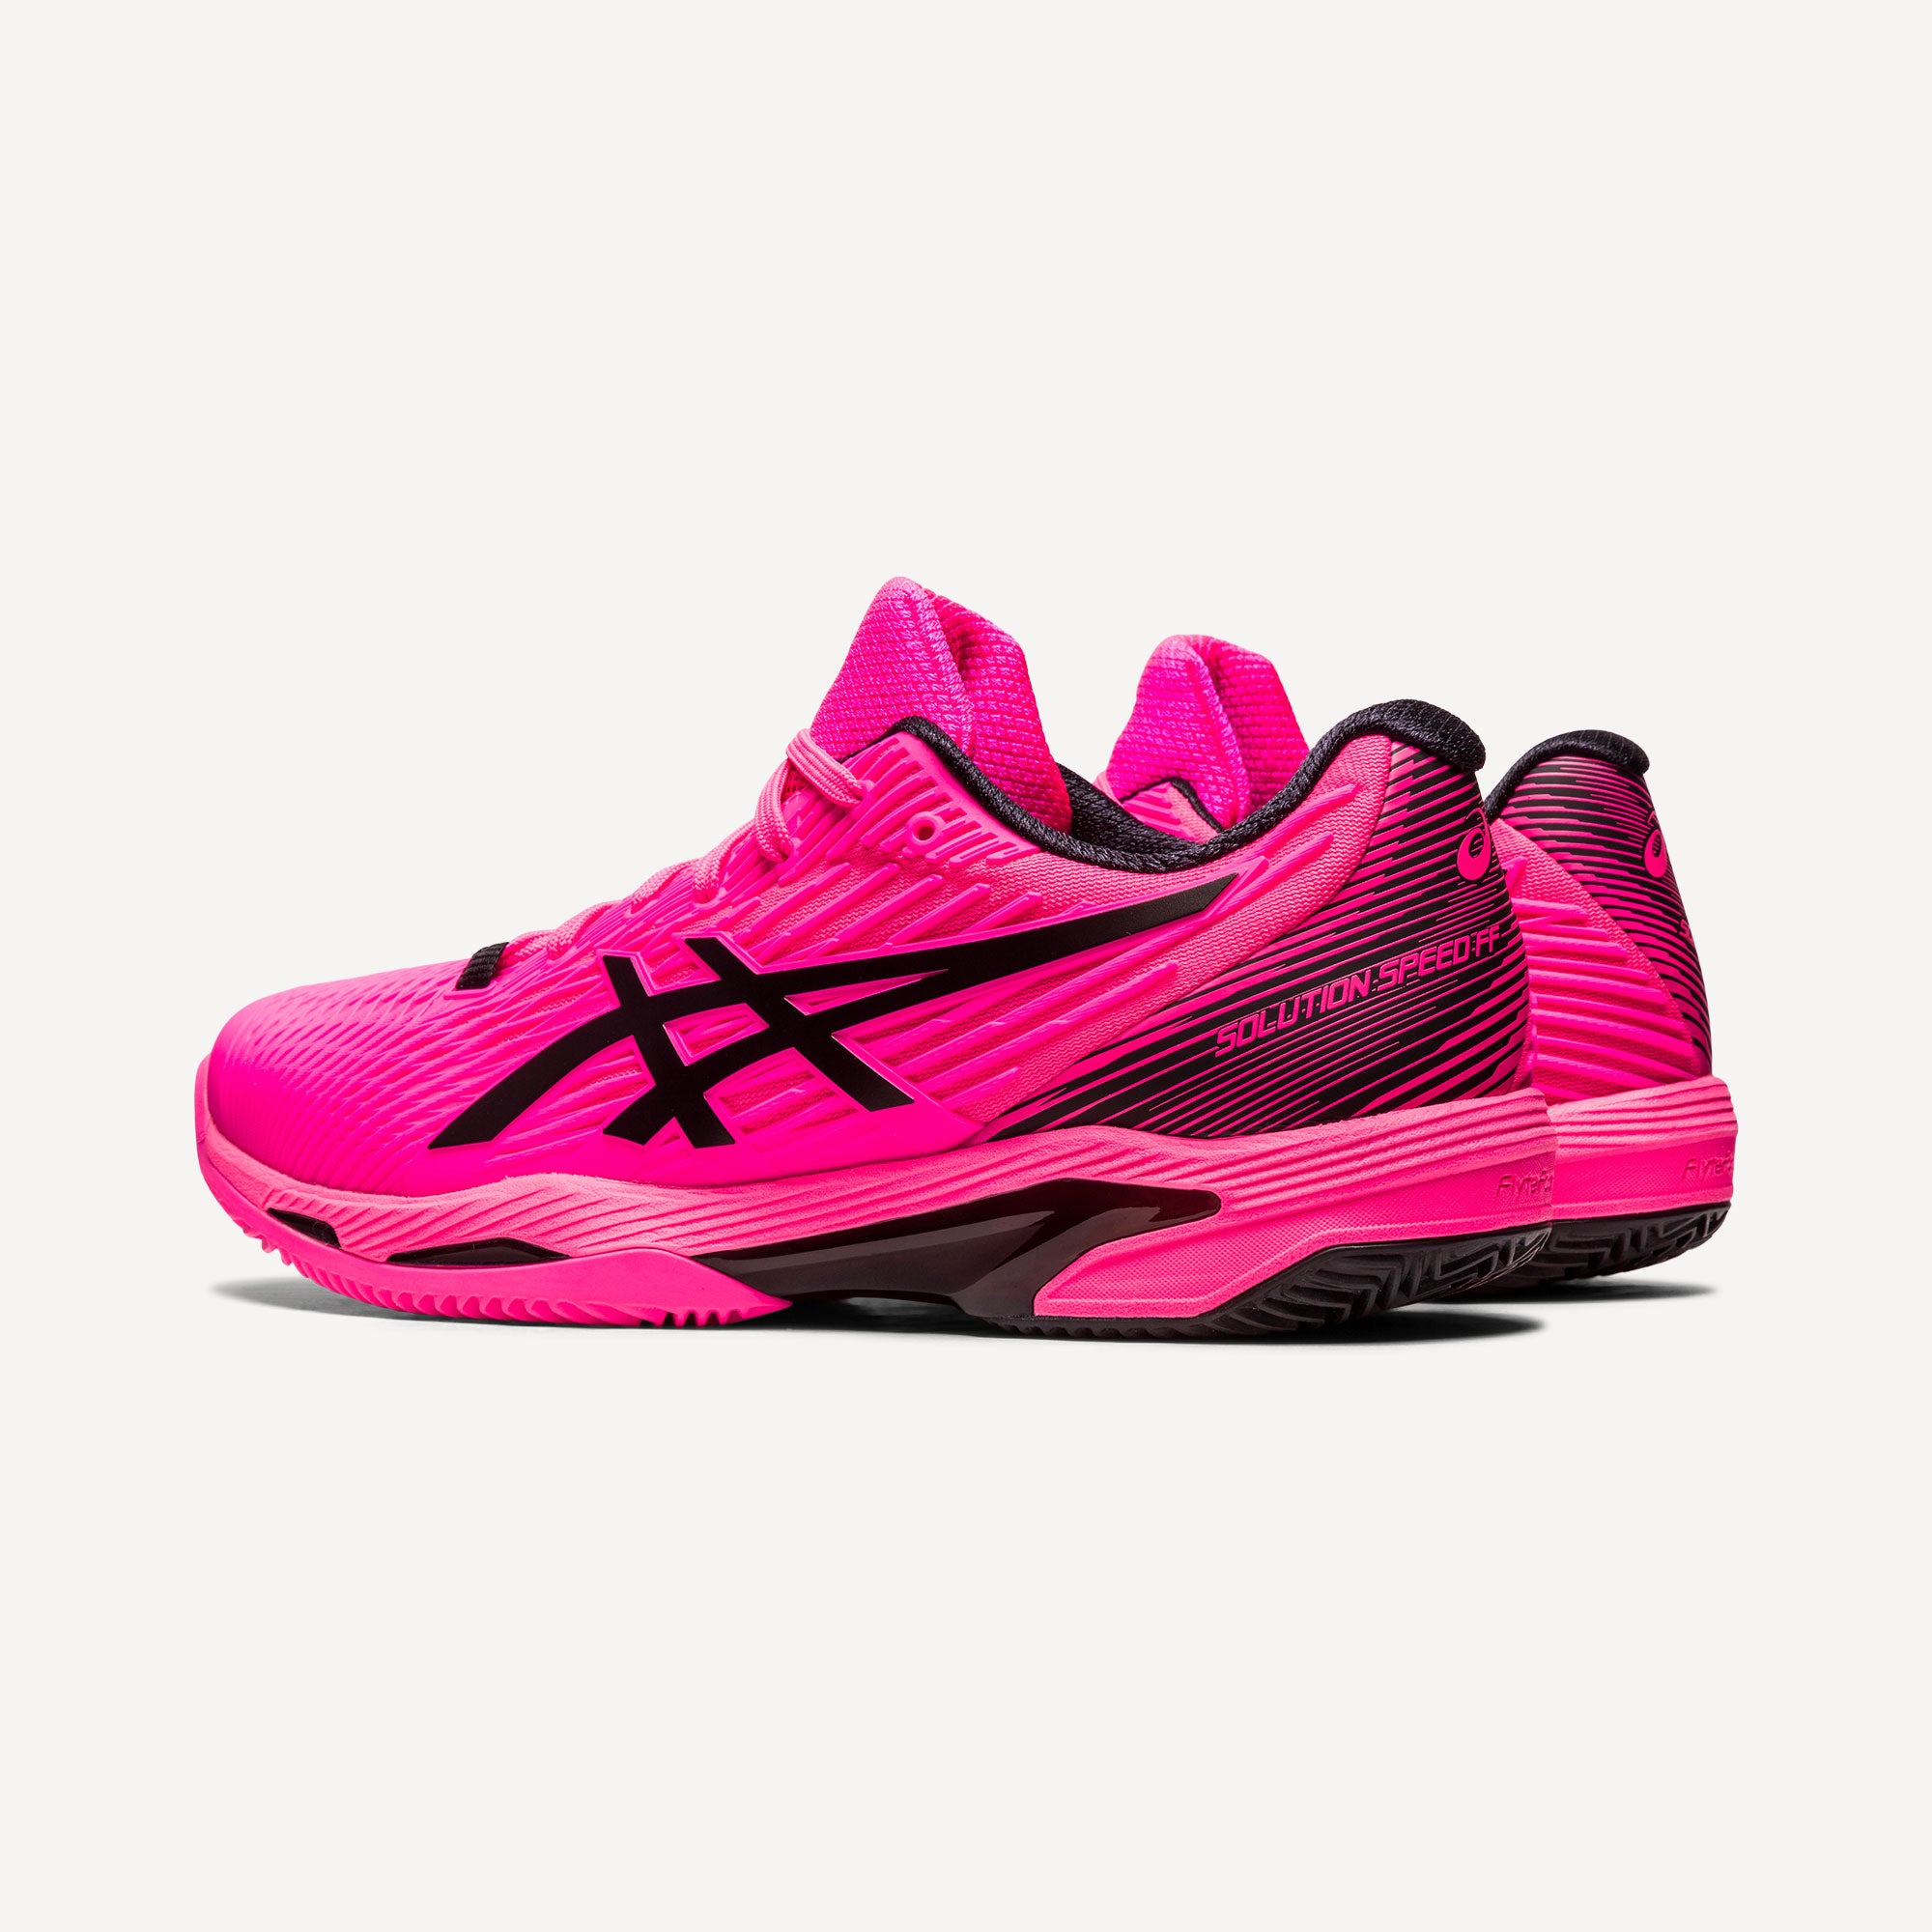 ASICS Solution Speed FF 2 Men's Clay Court Tennis Shoes Pink (5)